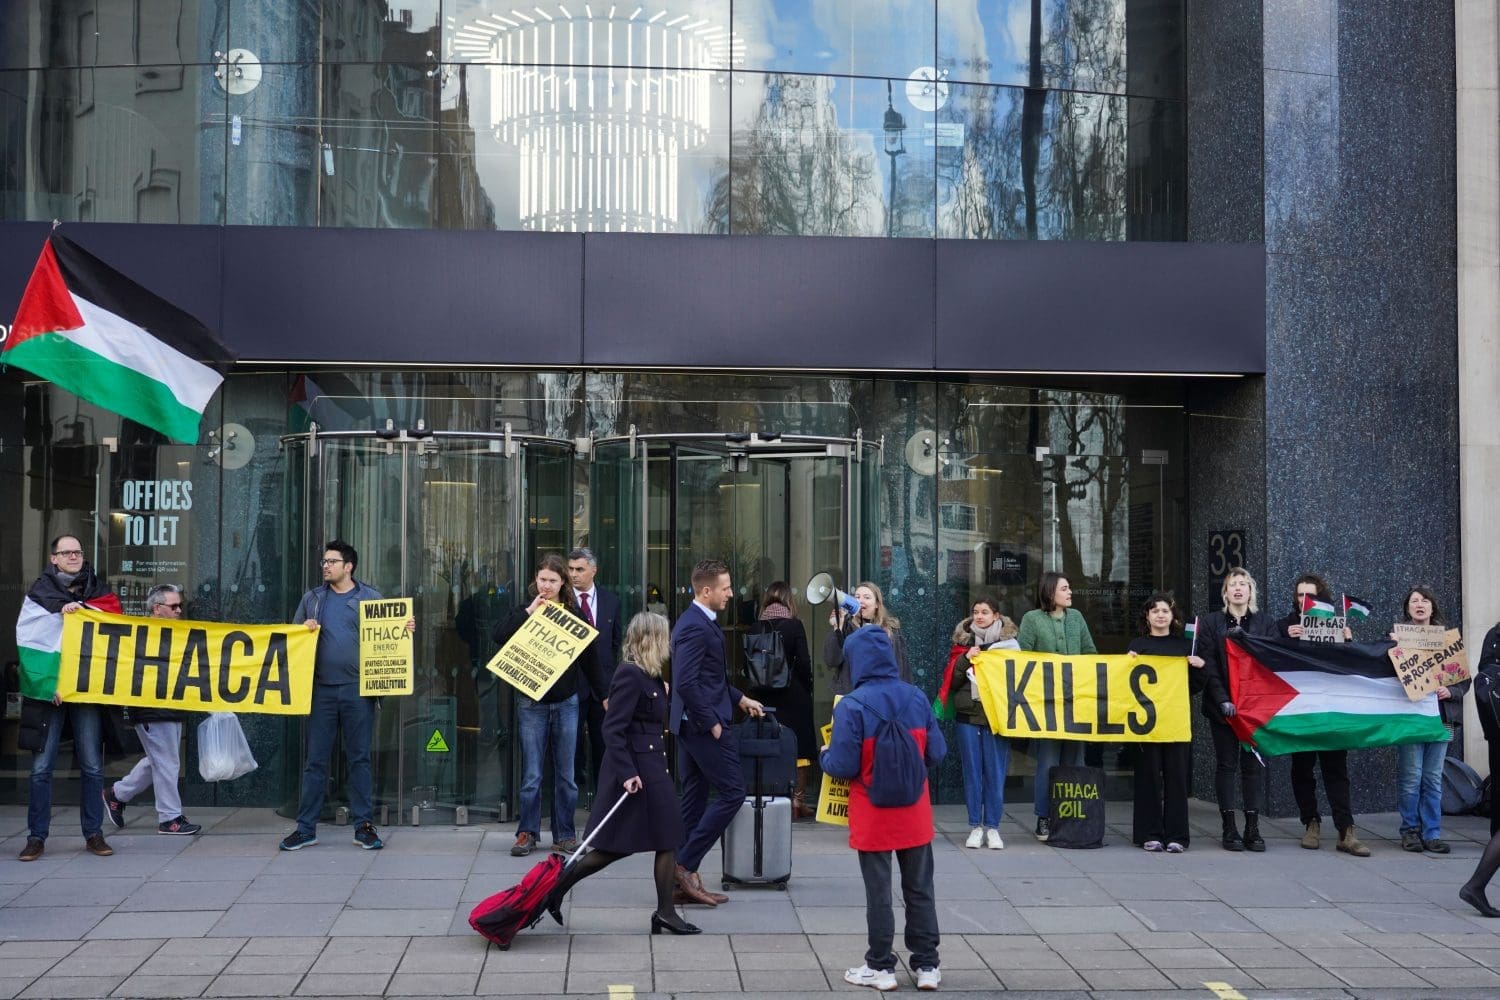 Actvists hold Palestinian flags and a banner which reads "Ithaca Kills" outside the company's London office building. 